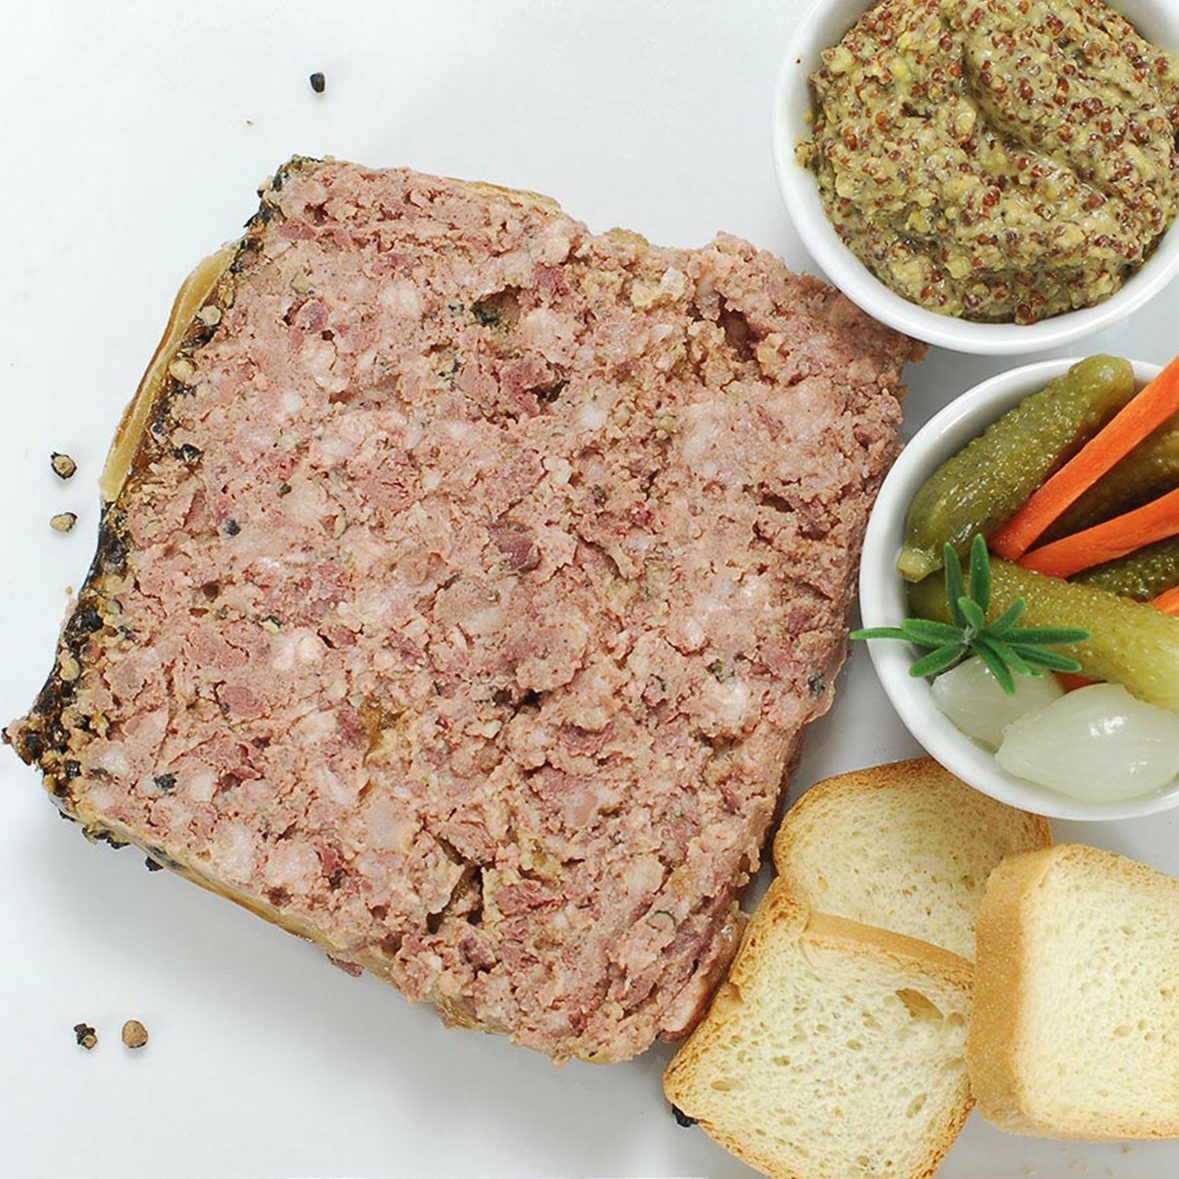 Pate for charcuterie